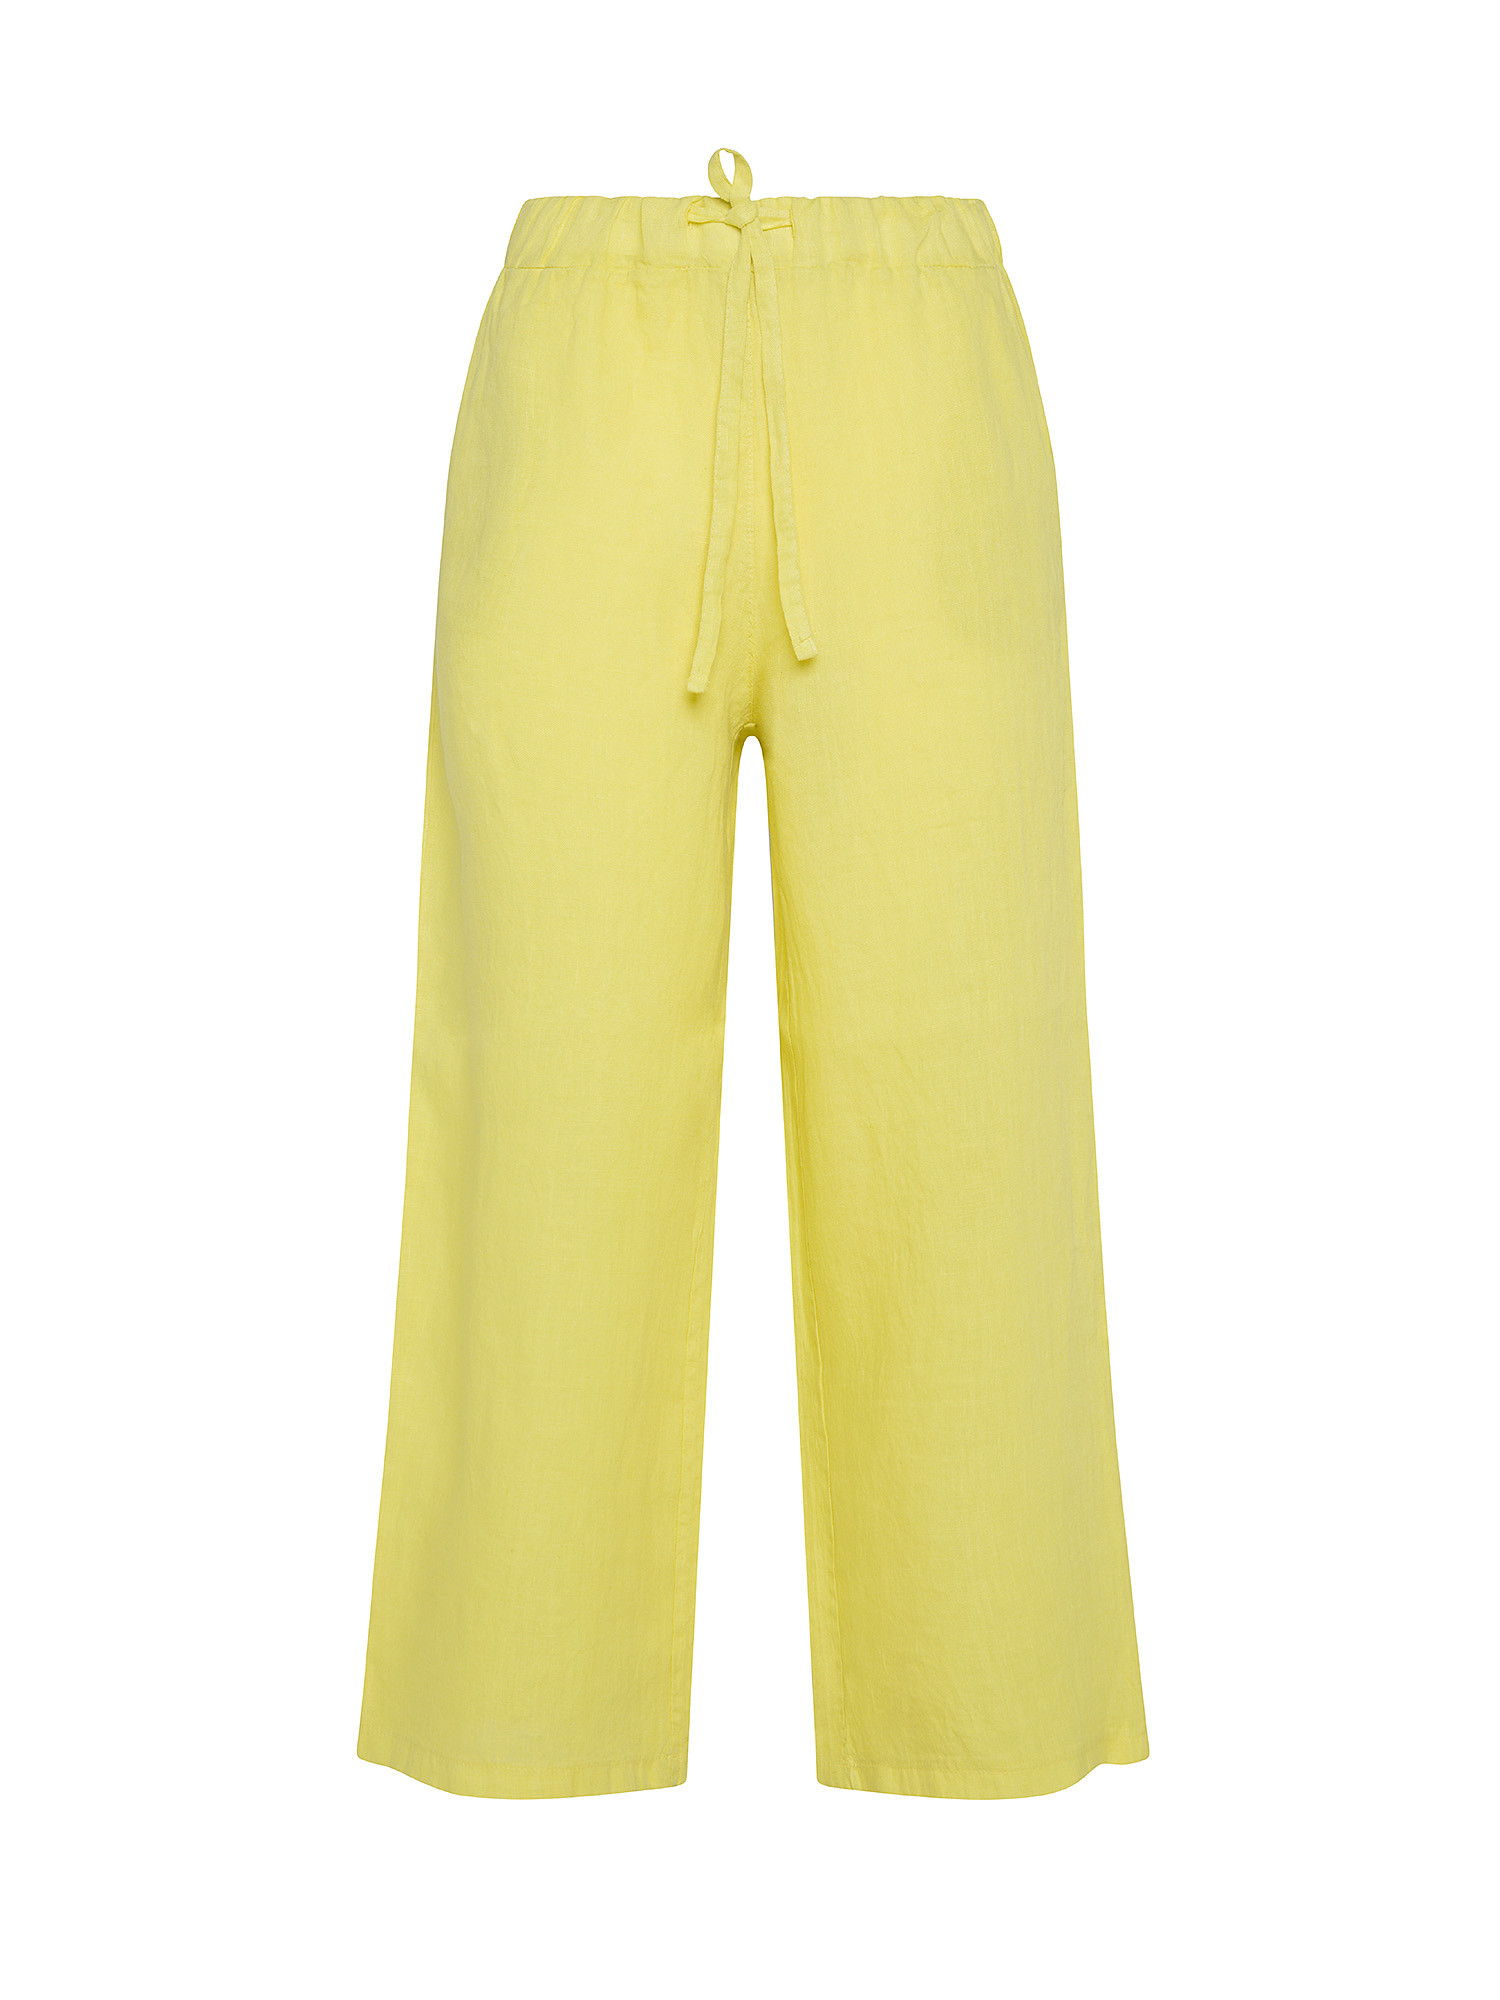 Koan - Wide linen trousers, Yellow, large image number 0